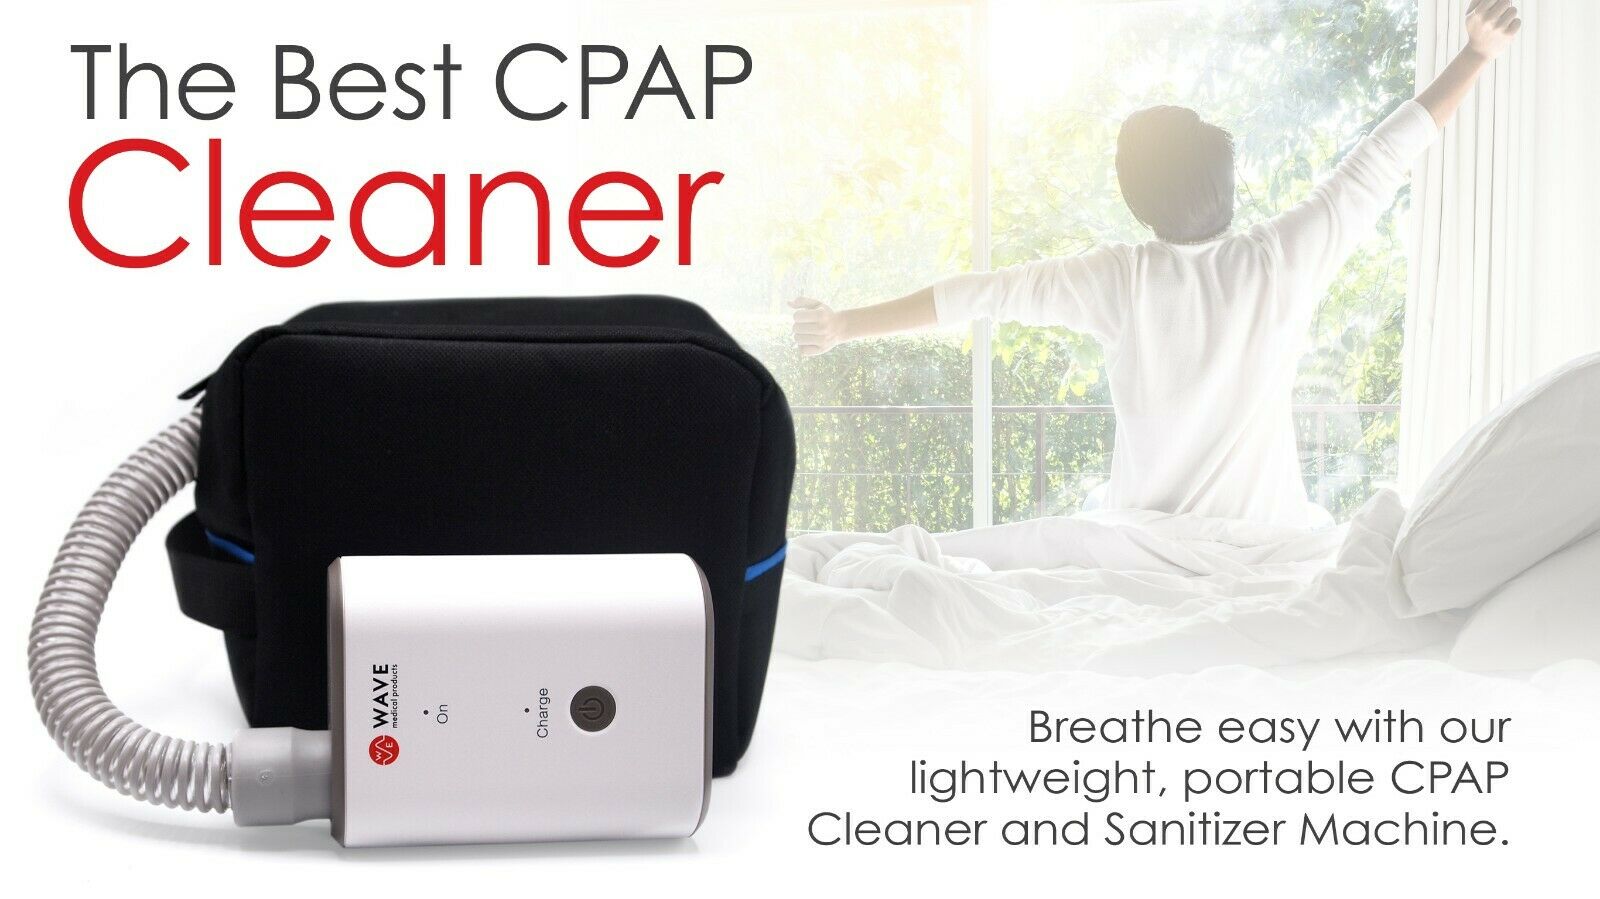 WAVE CPAP Cleaner Sanitizer Bundle with 6